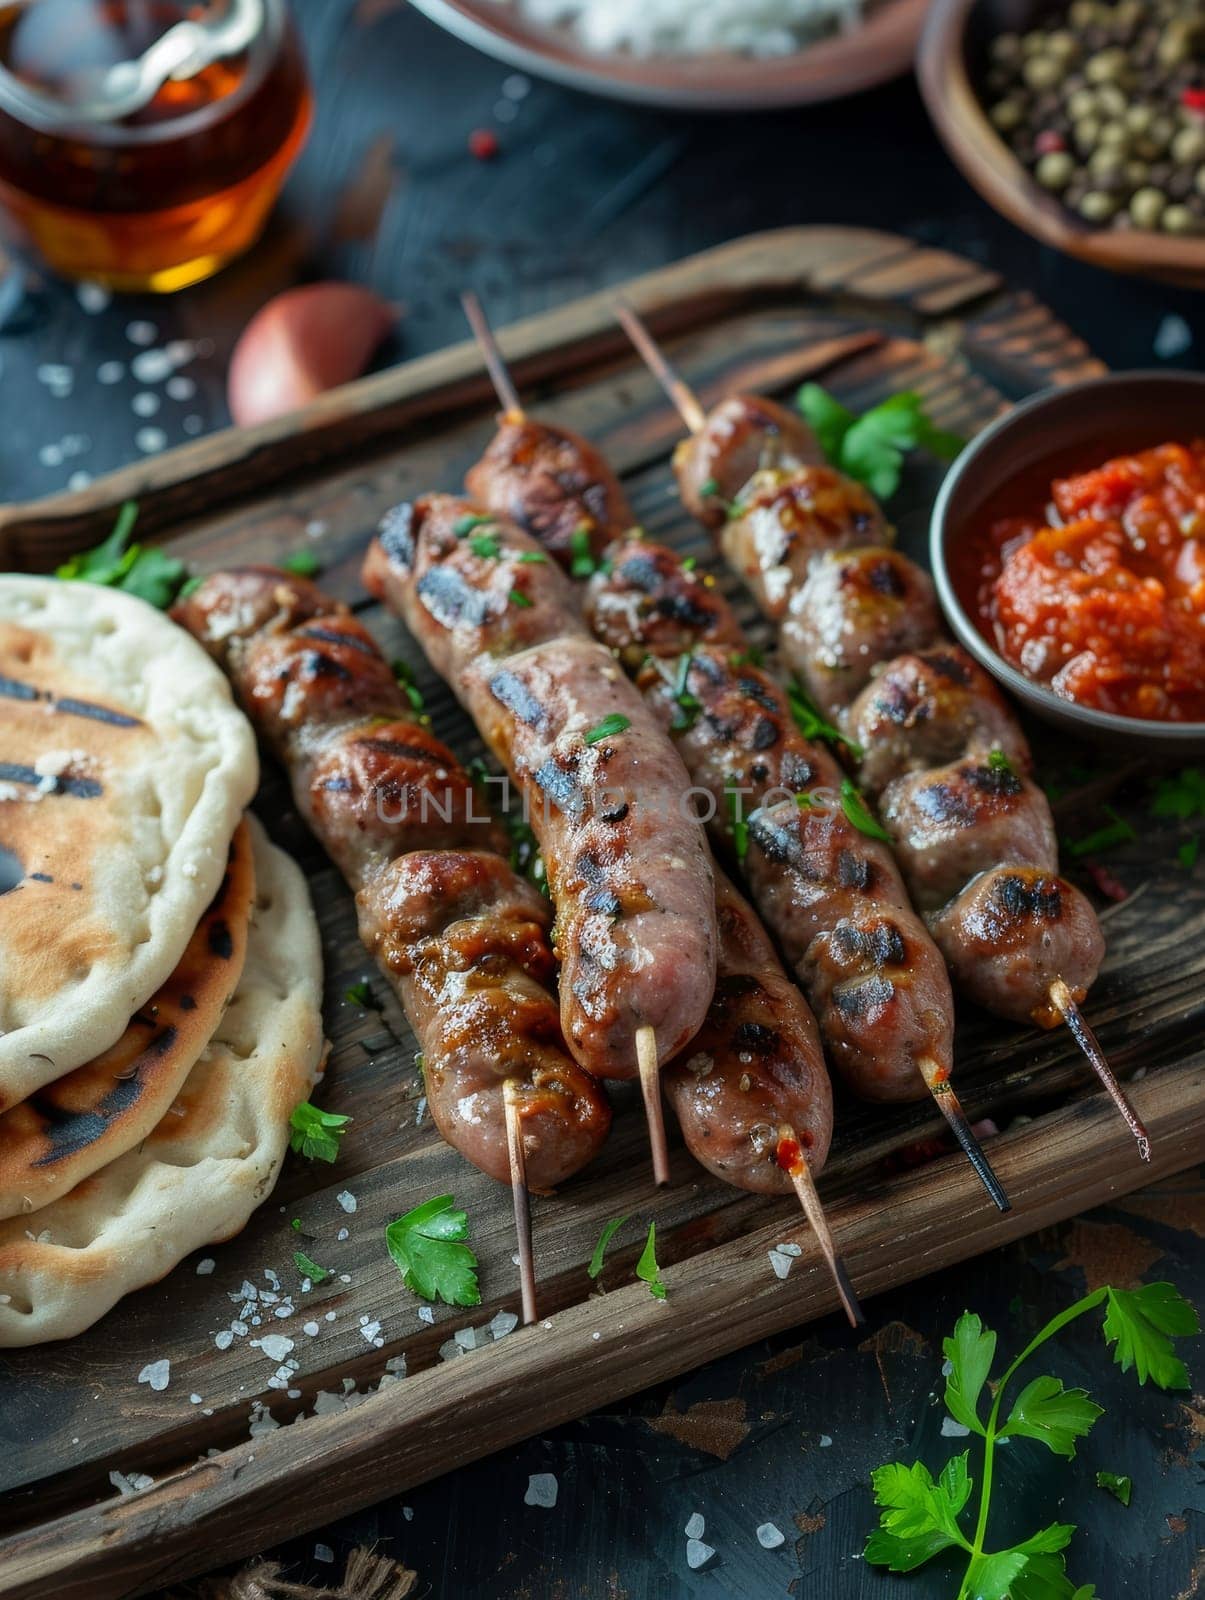 Freshly grilled Serbian cevapi, traditional small meat sausages, served on a rustic wooden tray with flatbread and condiments. This savory and flavorful dish showcases the authentic tastes of Balkan. by sfinks